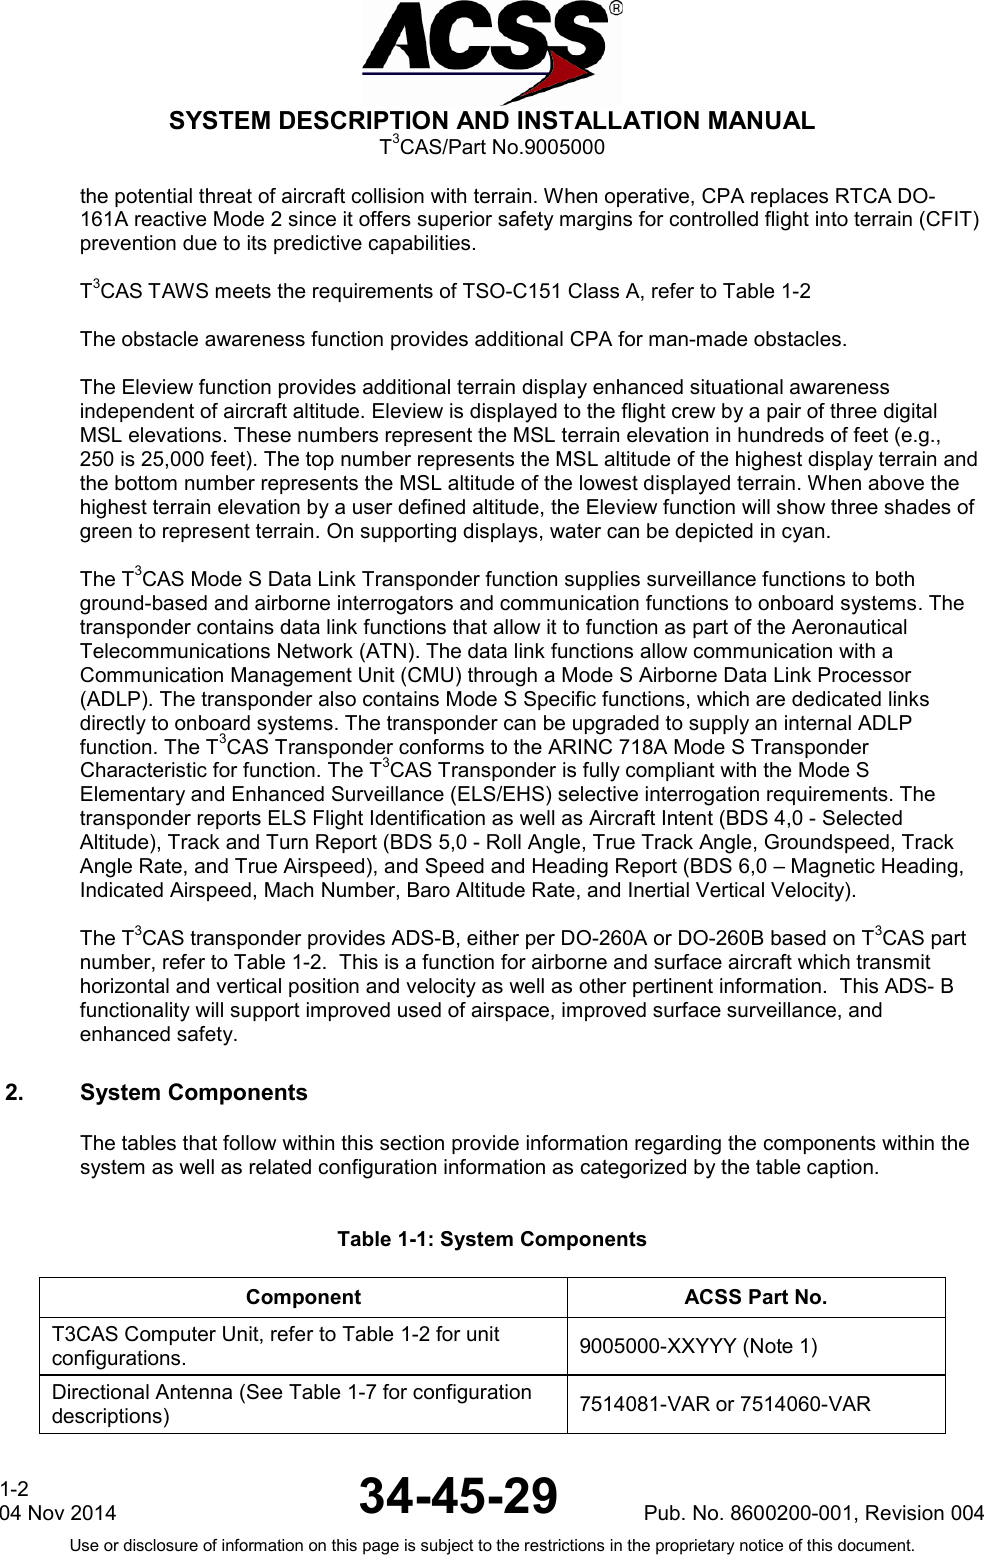  SYSTEM DESCRIPTION AND INSTALLATION MANUAL T3CAS/Part No.9005000 the potential threat of aircraft collision with terrain. When operative, CPA replaces RTCA DO-161A reactive Mode 2 since it offers superior safety margins for controlled flight into terrain (CFIT) prevention due to its predictive capabilities.  T3CAS TAWS meets the requirements of TSO-C151 Class A, refer to Table 1-2  The obstacle awareness function provides additional CPA for man-made obstacles.   The Eleview function provides additional terrain display enhanced situational awareness independent of aircraft altitude. Eleview is displayed to the flight crew by a pair of three digital MSL elevations. These numbers represent the MSL terrain elevation in hundreds of feet (e.g., 250 is 25,000 feet). The top number represents the MSL altitude of the highest display terrain and the bottom number represents the MSL altitude of the lowest displayed terrain. When above the highest terrain elevation by a user defined altitude, the Eleview function will show three shades of green to represent terrain. On supporting displays, water can be depicted in cyan.  The T3CAS Mode S Data Link Transponder function supplies surveillance functions to both ground-based and airborne interrogators and communication functions to onboard systems. The transponder contains data link functions that allow it to function as part of the Aeronautical Telecommunications Network (ATN). The data link functions allow communication with a Communication Management Unit (CMU) through a Mode S Airborne Data Link Processor (ADLP). The transponder also contains Mode S Specific functions, which are dedicated links directly to onboard systems. The transponder can be upgraded to supply an internal ADLP function. The T3CAS Transponder conforms to the ARINC 718A Mode S Transponder Characteristic for function. The T3CAS Transponder is fully compliant with the Mode S Elementary and Enhanced Surveillance (ELS/EHS) selective interrogation requirements. The transponder reports ELS Flight Identification as well as Aircraft Intent (BDS 4,0 - Selected Altitude), Track and Turn Report (BDS 5,0 - Roll Angle, True Track Angle, Groundspeed, Track Angle Rate, and True Airspeed), and Speed and Heading Report (BDS 6,0 – Magnetic Heading, Indicated Airspeed, Mach Number, Baro Altitude Rate, and Inertial Vertical Velocity).  The T3CAS transponder provides ADS-B, either per DO-260A or DO-260B based on T3CAS part number, refer to Table 1-2.  This is a function for airborne and surface aircraft which transmit horizontal and vertical position and velocity as well as other pertinent information.  This ADS- B functionality will support improved used of airspace, improved surface surveillance, and enhanced safety. 2. System Components The tables that follow within this section provide information regarding the components within the system as well as related configuration information as categorized by the table caption.  Table 1-1: System Components Component ACSS Part No. T3CAS Computer Unit, refer to Table 1-2 for unit configurations. 9005000-XXYYY (Note 1) Directional Antenna (See Table 1-7 for configuration descriptions) 7514081-VAR or 7514060-VAR 1-2 04 Nov 2014 34-45-29 Pub. No. 8600200-001, Revision 004 Use or disclosure of information on this page is subject to the restrictions in the proprietary notice of this document.  